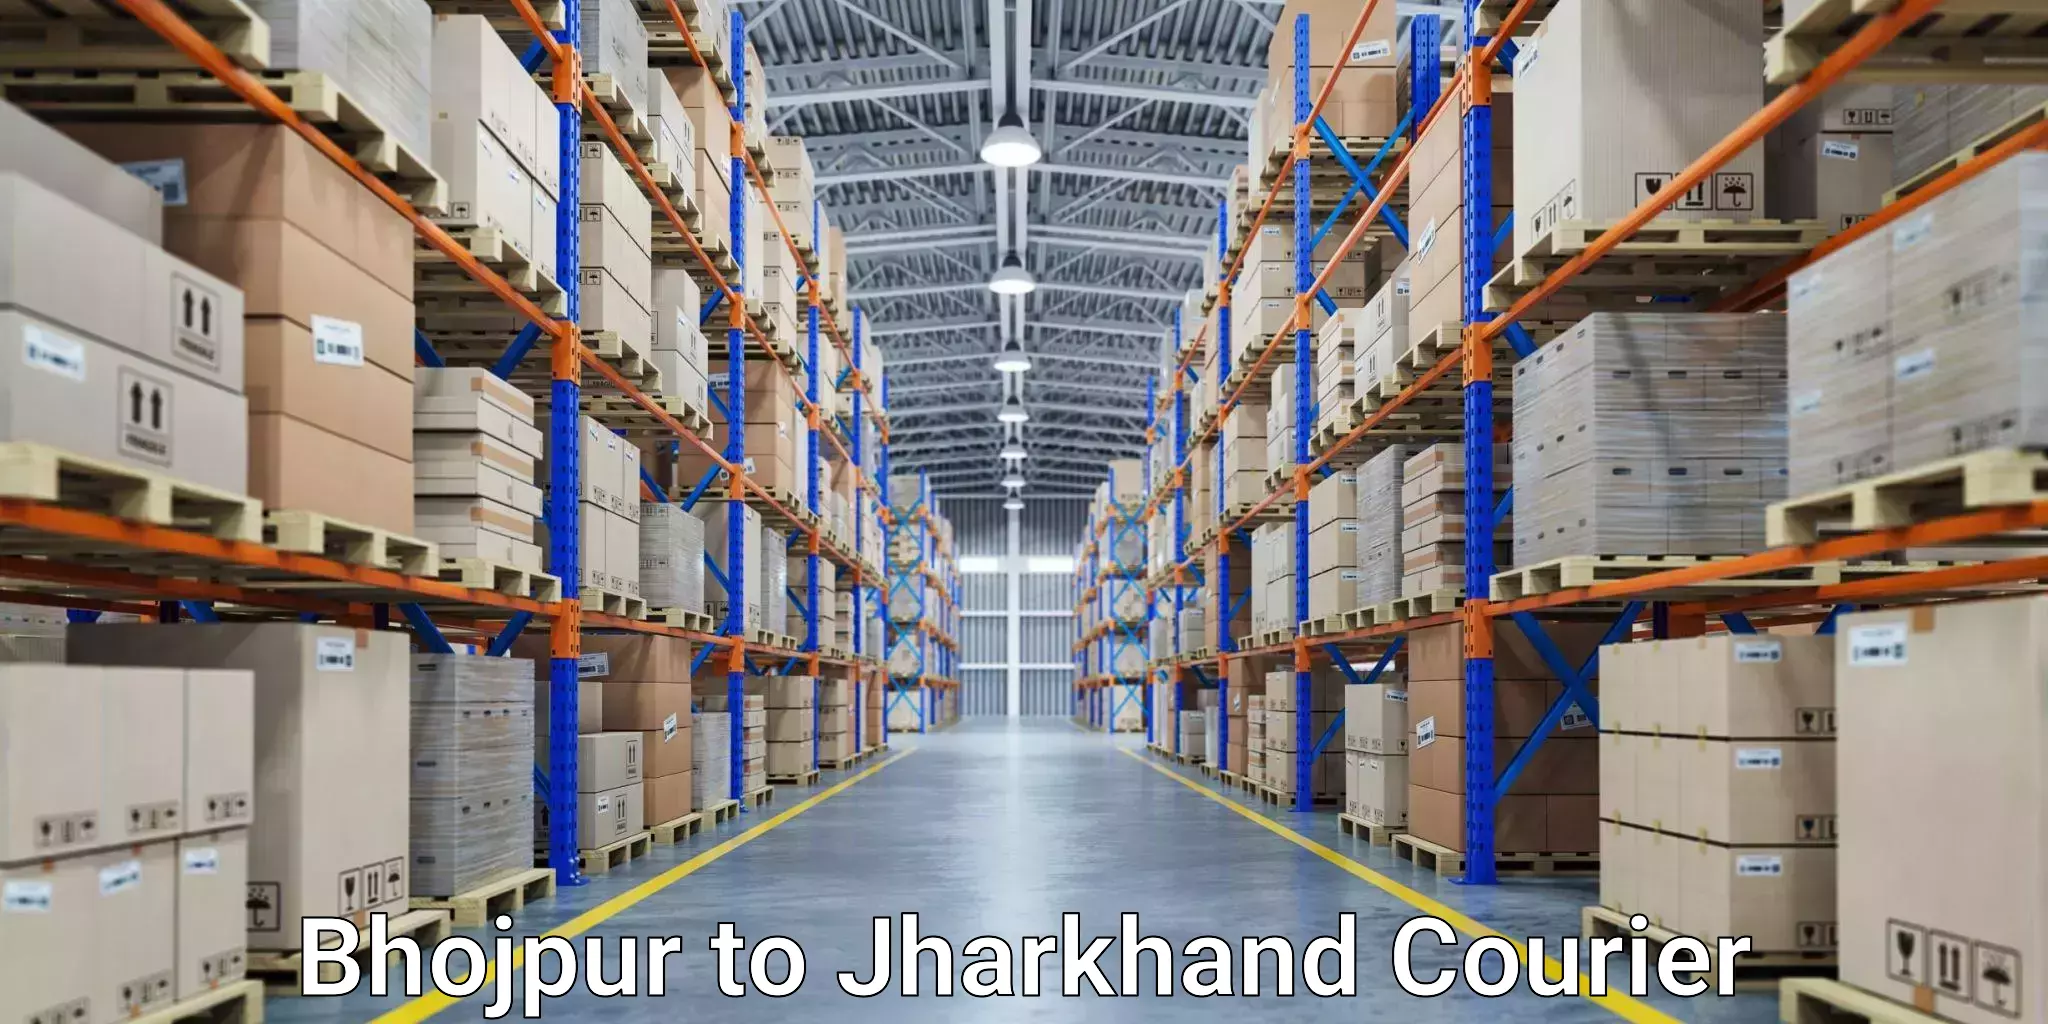 Next-day delivery options Bhojpur to Jharkhand